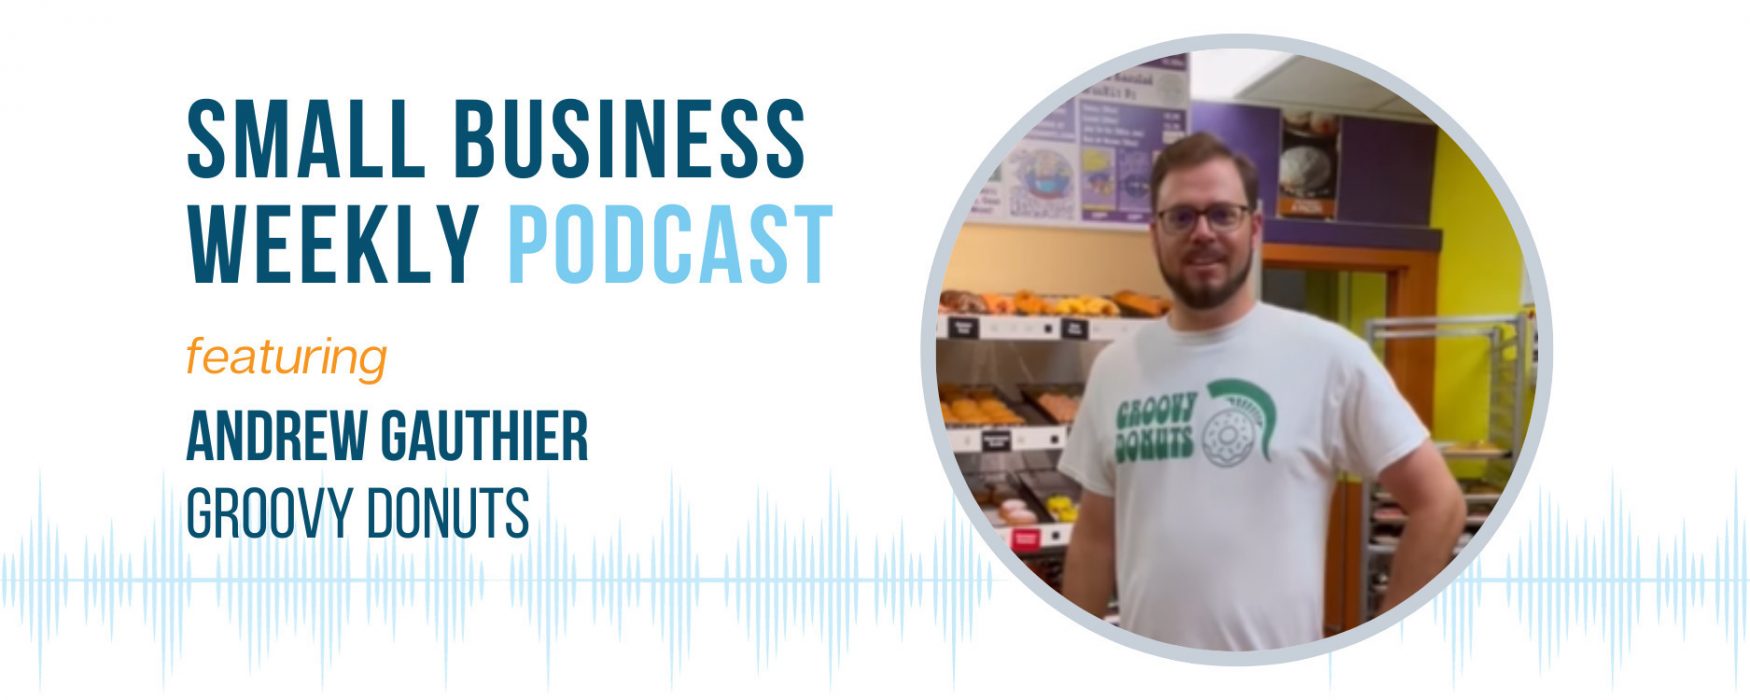 Andrew Gauthier, featured on this weeks episode of the Small Business Weekly podcast